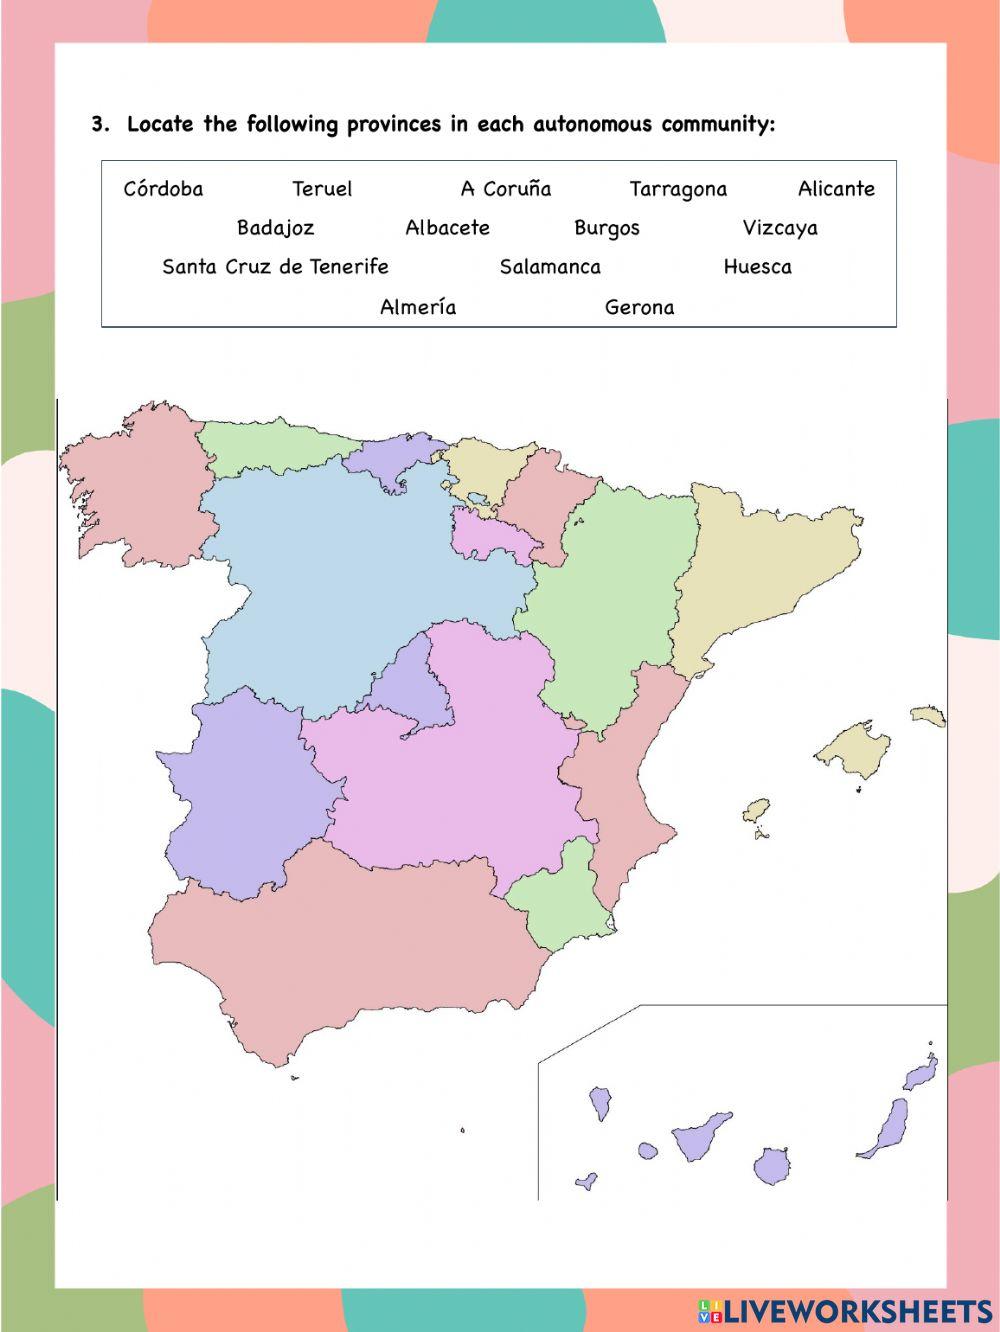 Spain (Separation of Powers and Political Organisation)